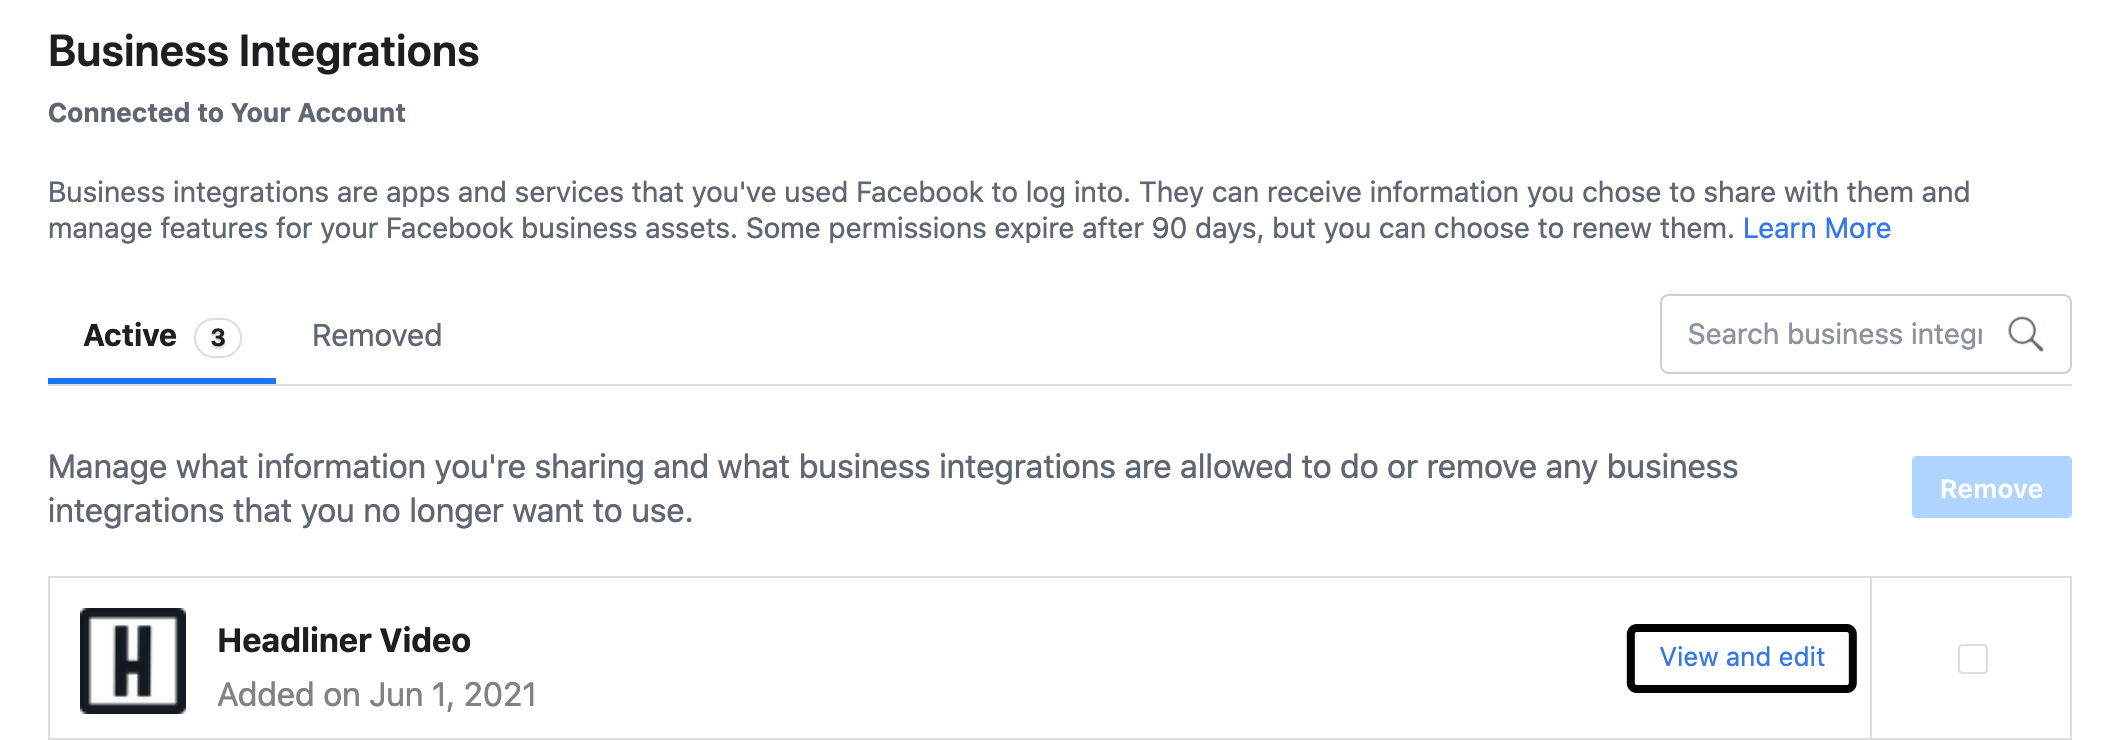 Business_Integrations_Setting.png